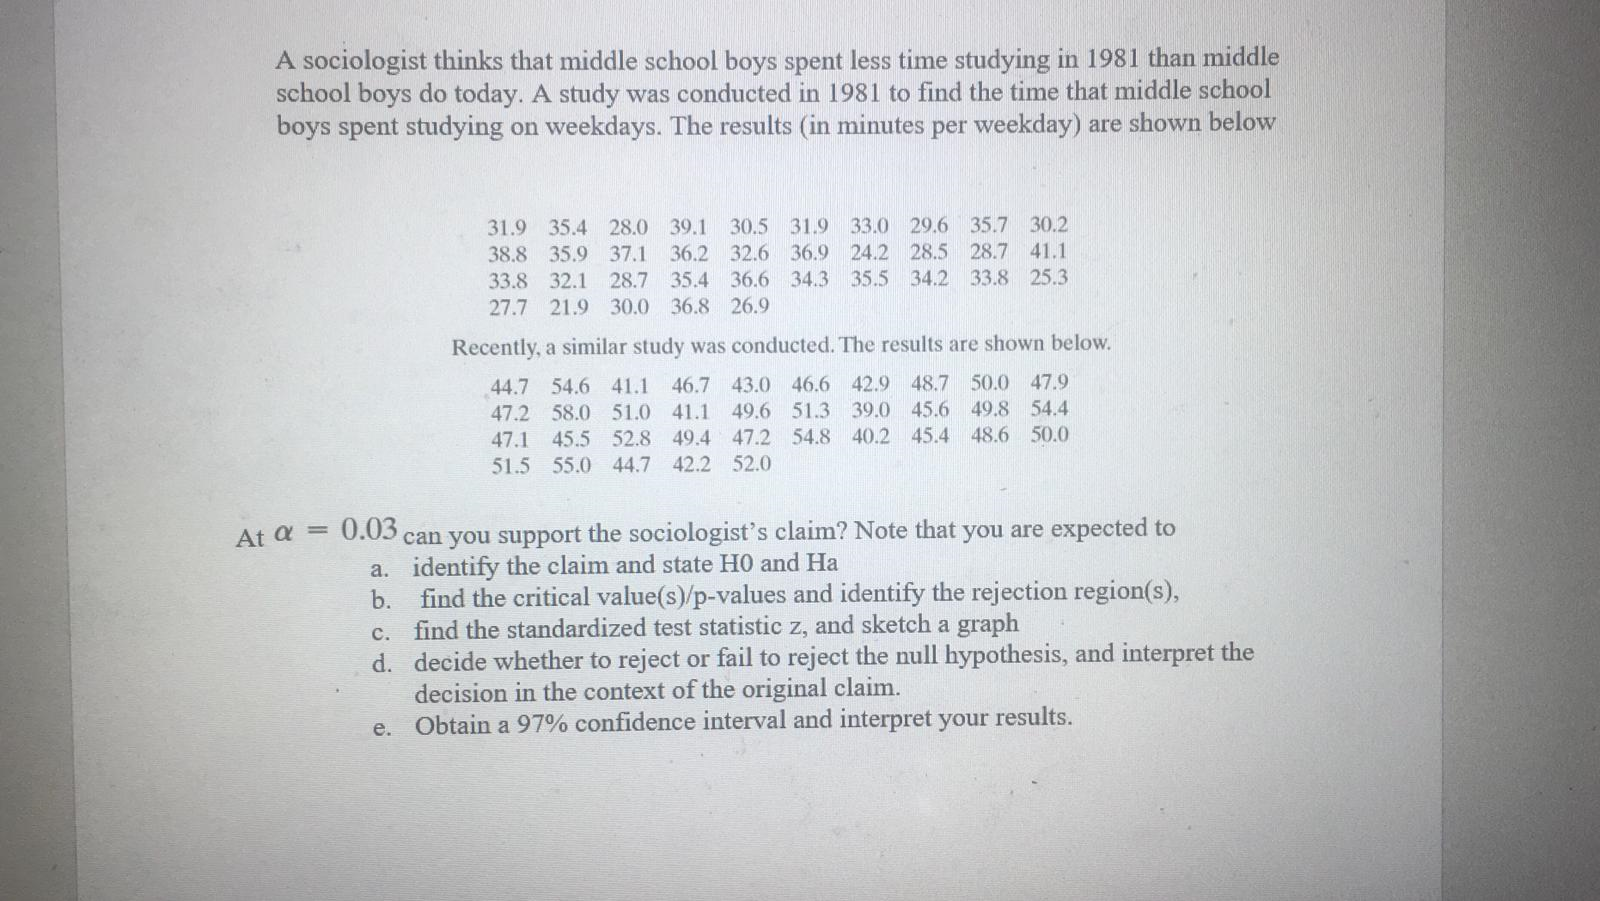 A sociologist thinks that middle school boys spent less time studying in 1981 than middle
school boys do today. A study was conducted in 1981 to find the time that middle school
boys spent studying on weekdays. The results (in minutes per weekday) are shown below
